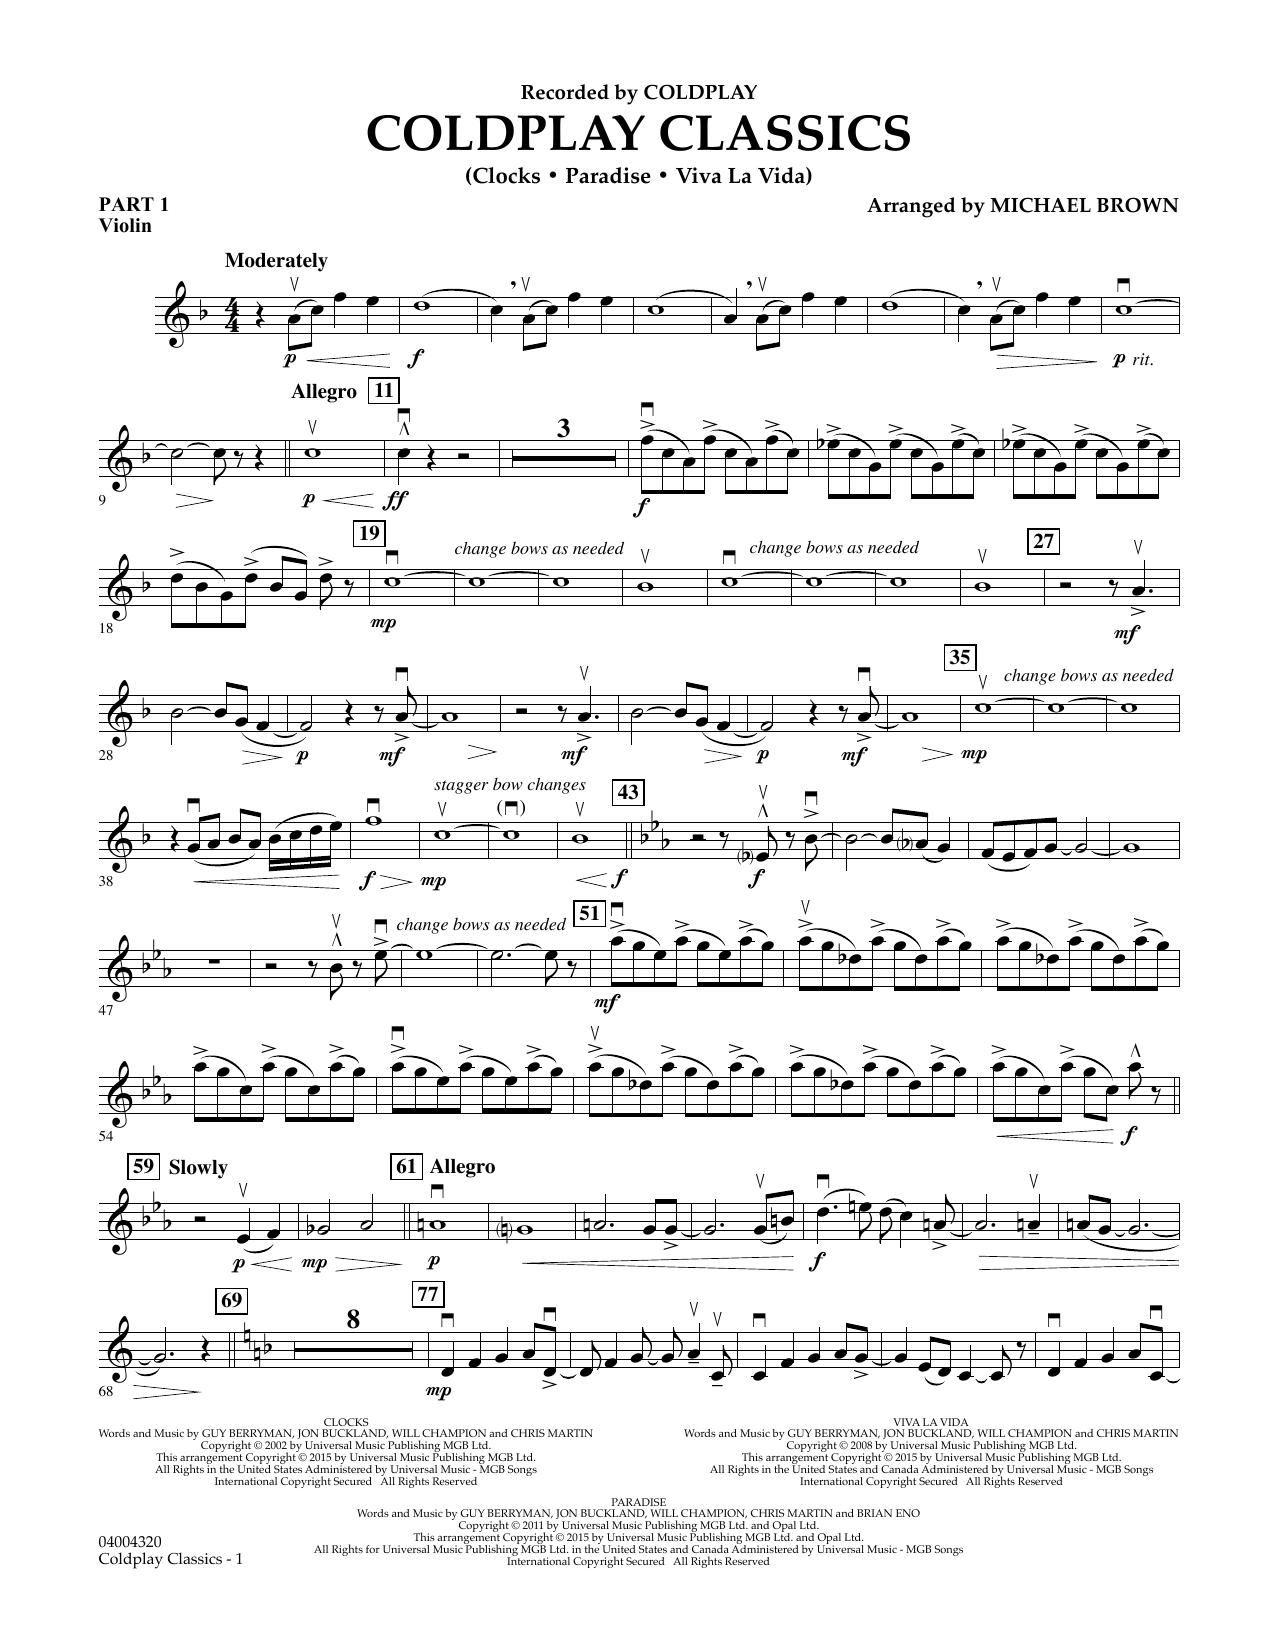 Michael Brown Coldplay Classics - Pt.1 - Violin sheet music notes and chords. Download Printable PDF.